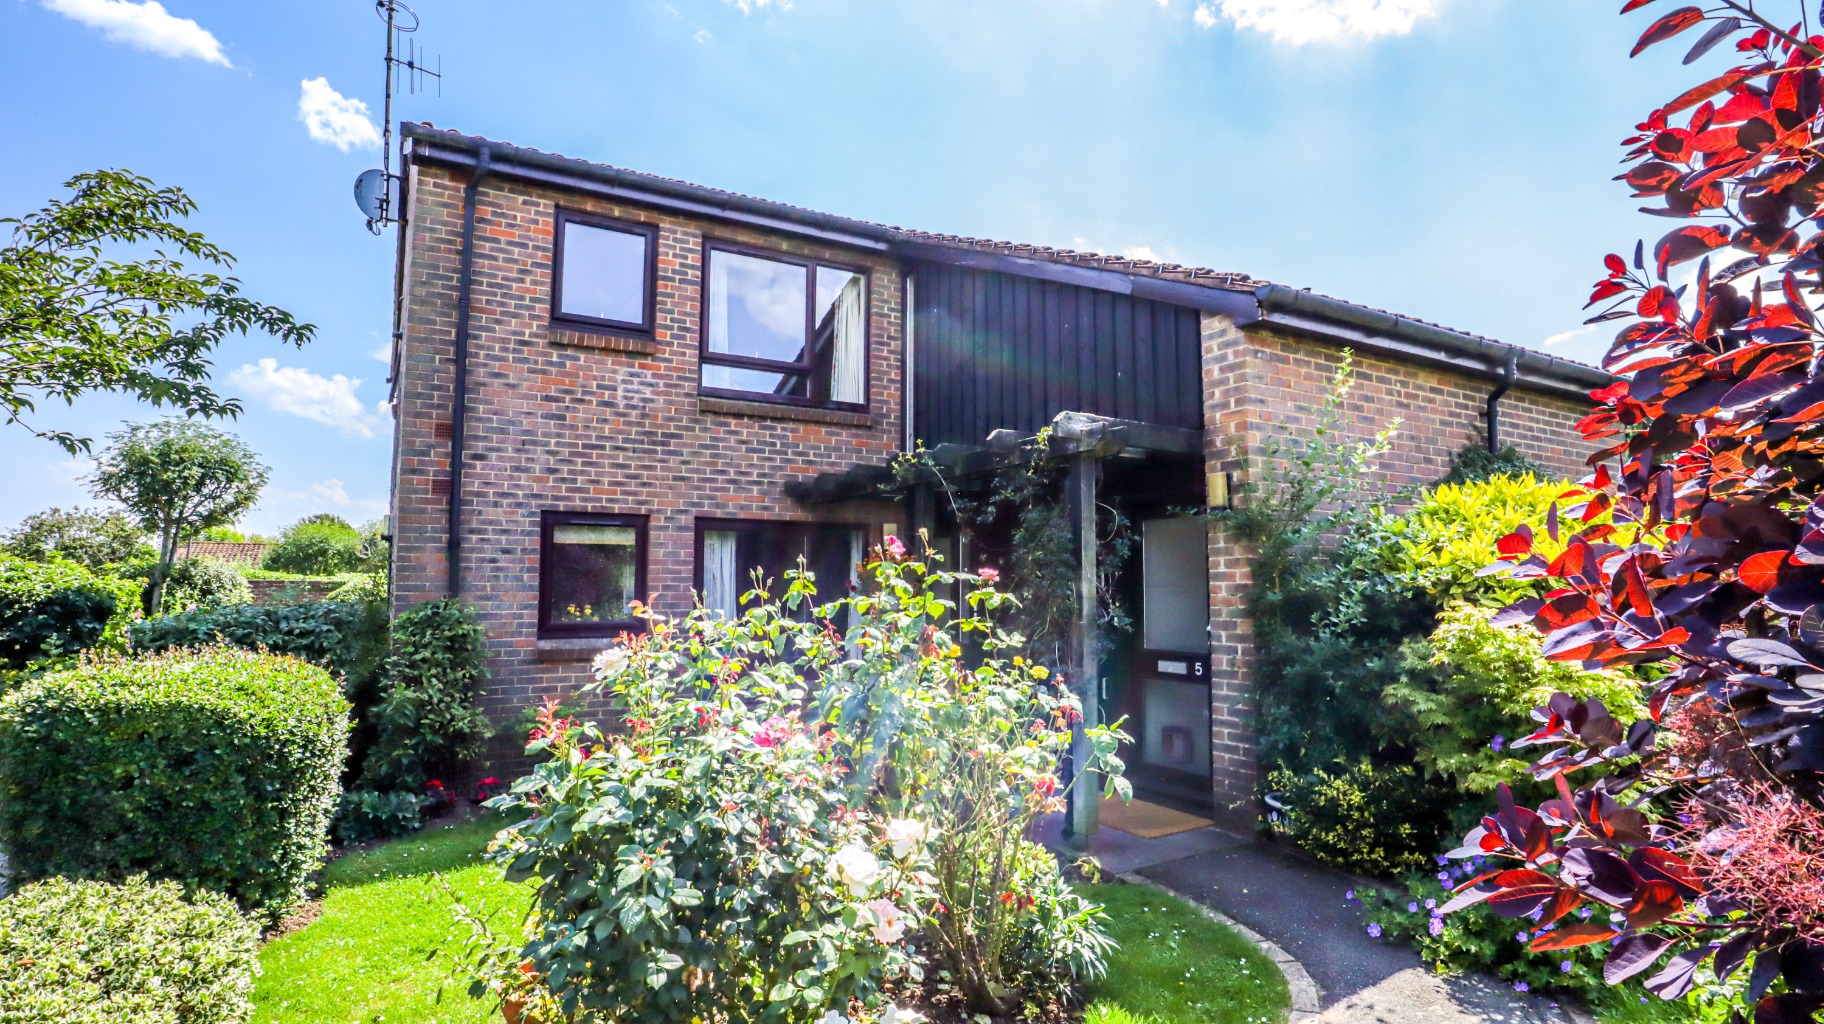 Offered to the market this lovely two double bedroom first floor retirement maisonette, situated on the sought after Elmbridge Retirement Village in Cranleigh. This excellent sized maisonette is in need of some TLC, but offers the new owners of the property to opportunity to add their own personal